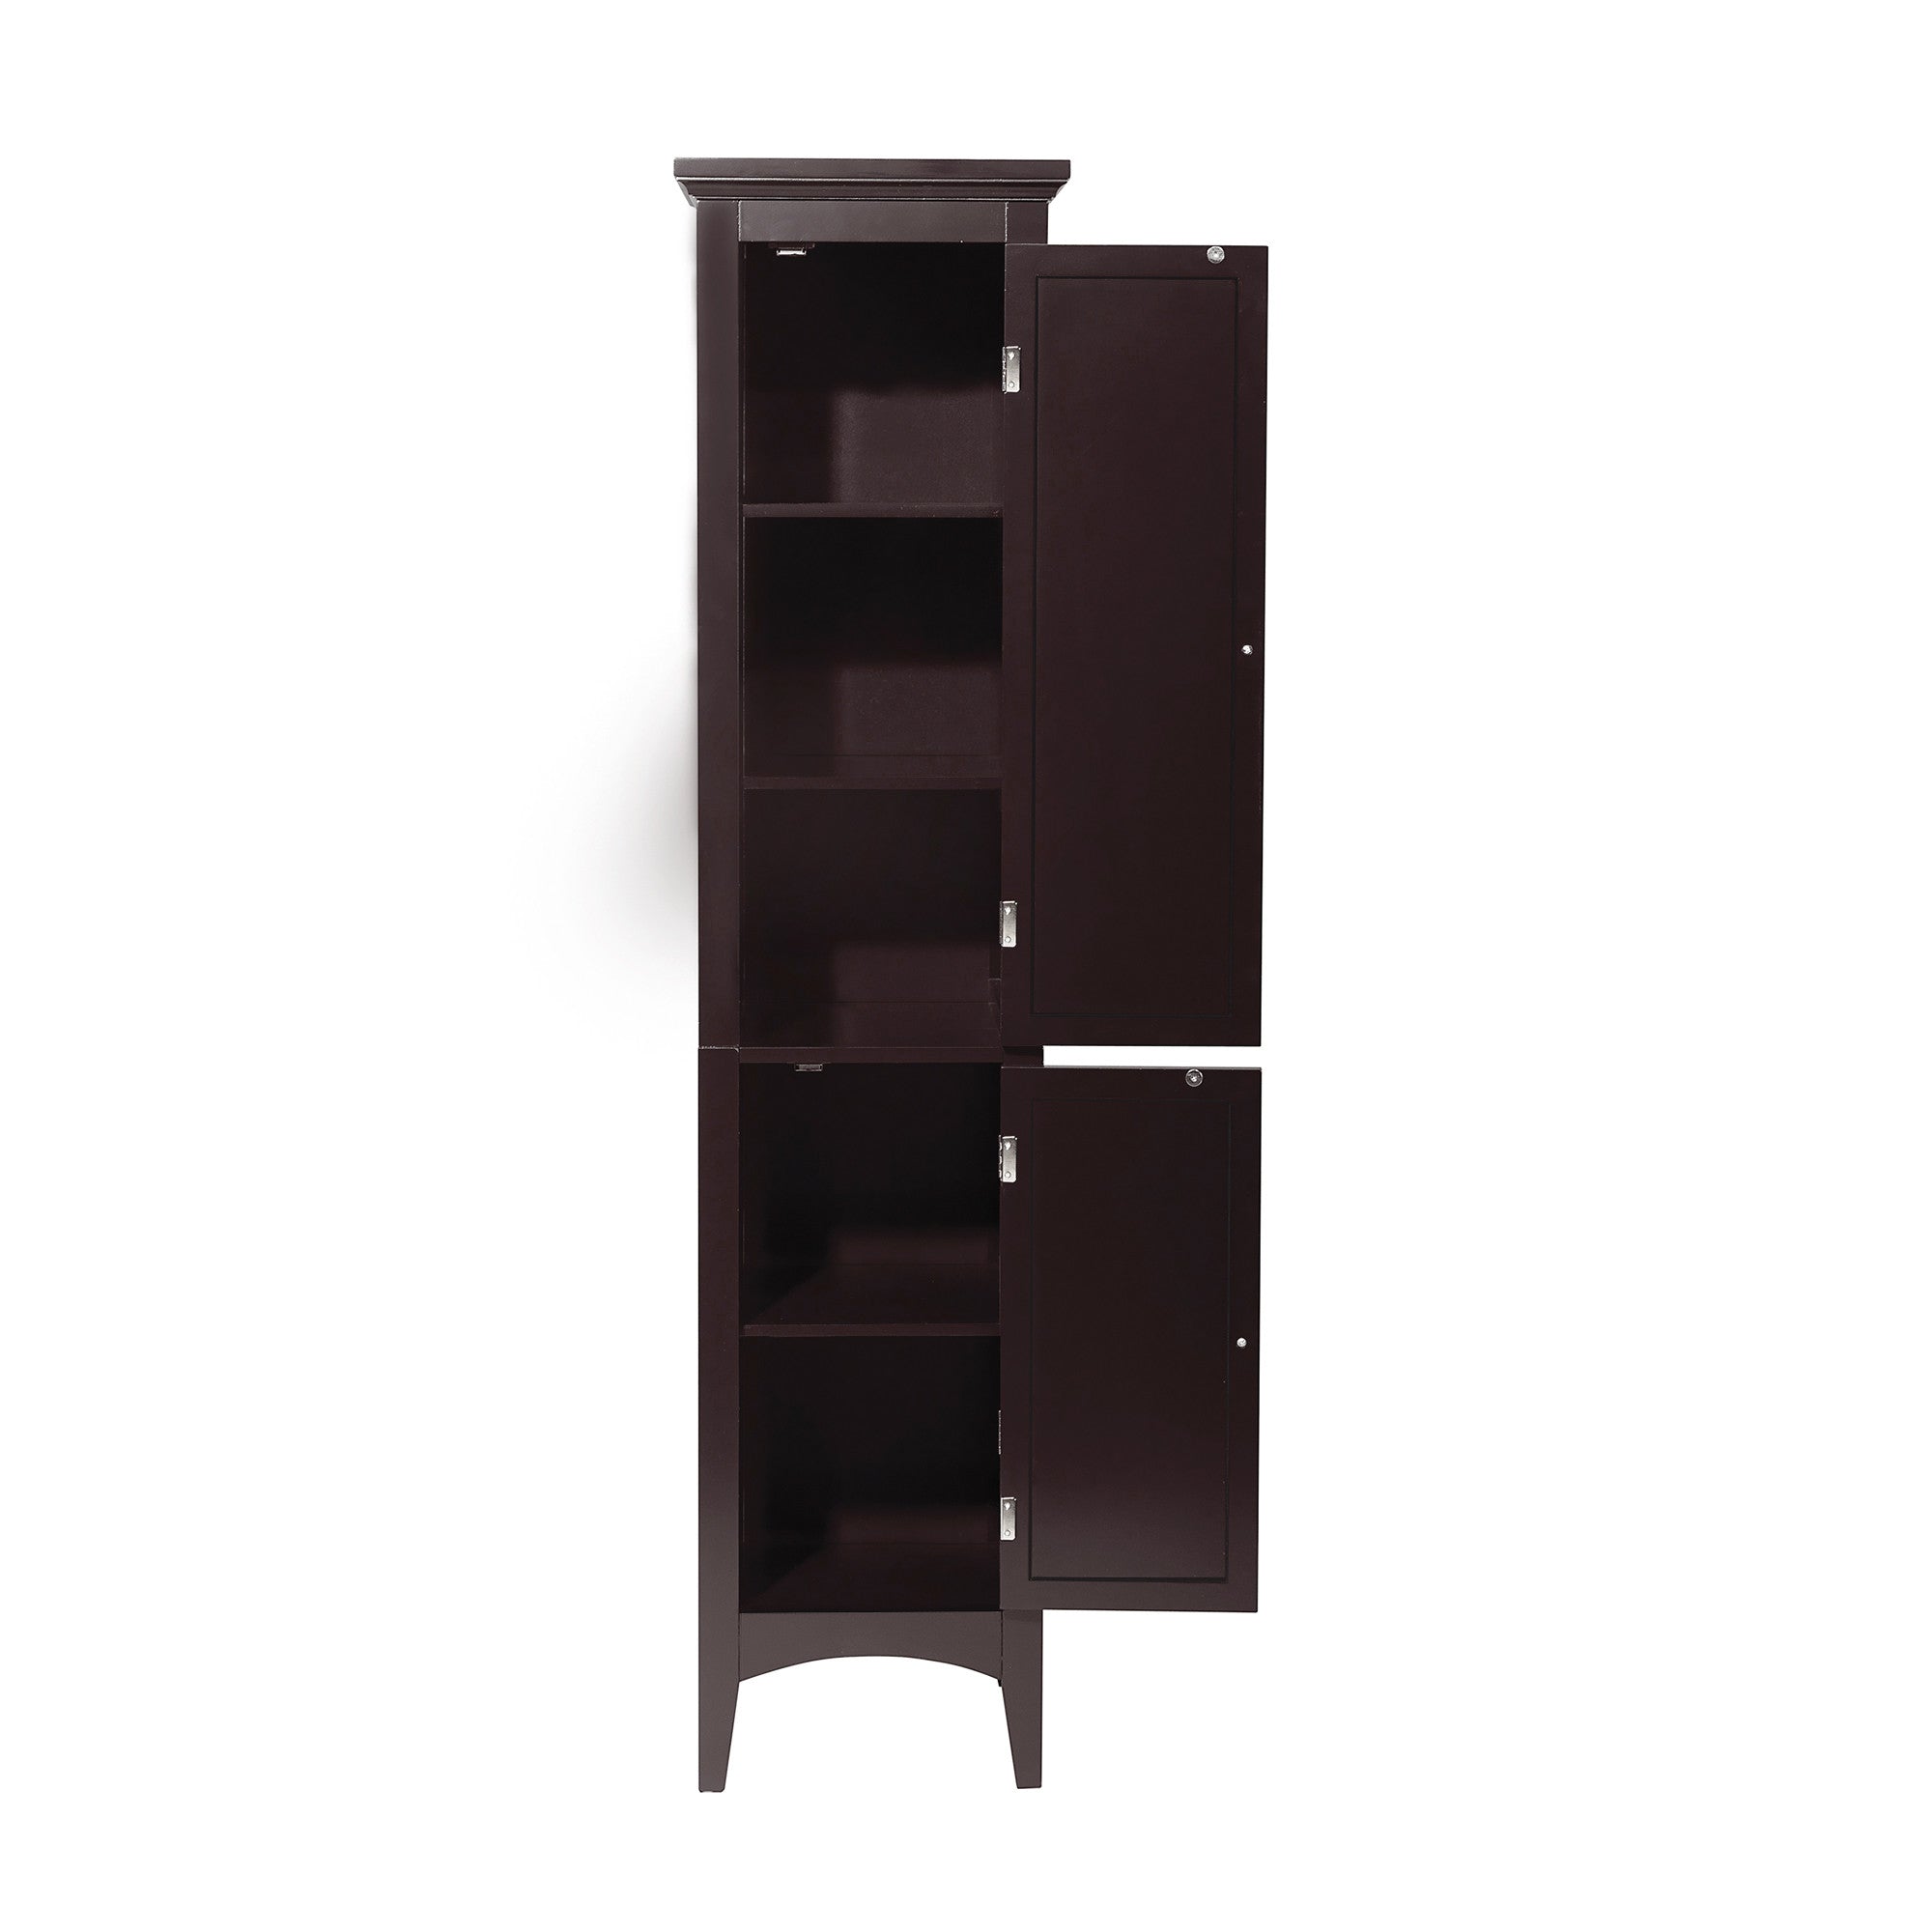 Teamson Home Glancy Wooden Tall Tower Cabinet with Storage, Dark Brown